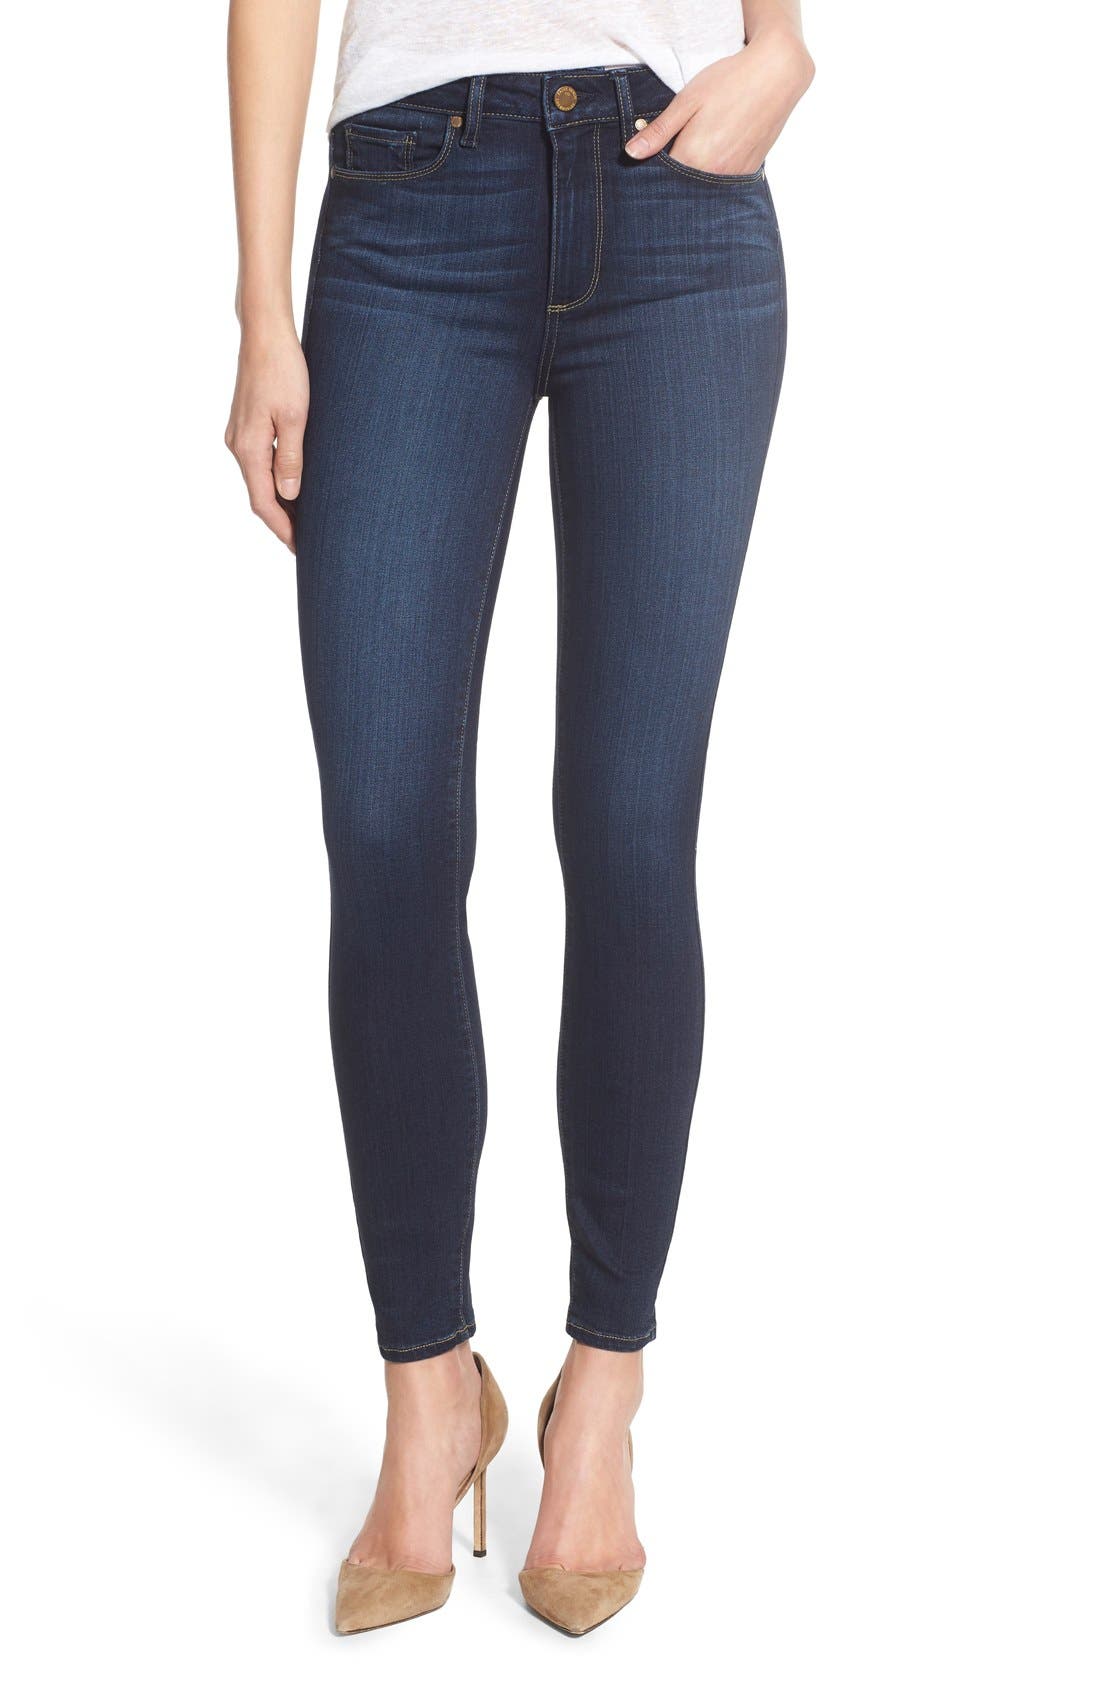 paige jeans hoxton ultra skinny